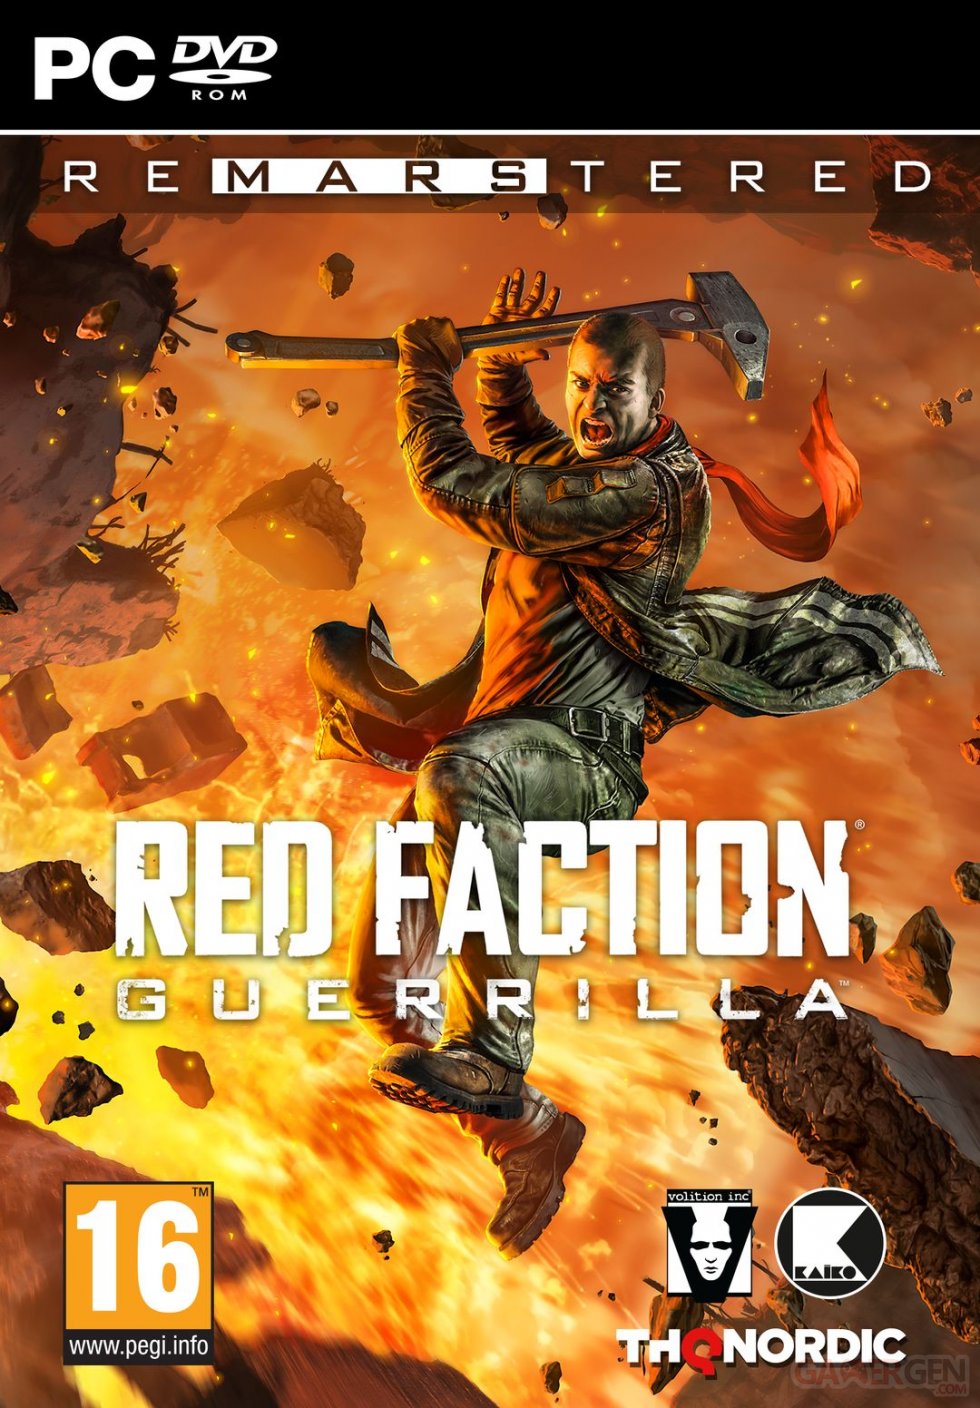 Red-Faction-Guerilla-Re-Mars-tered-jaquette-PC-29-03-2018